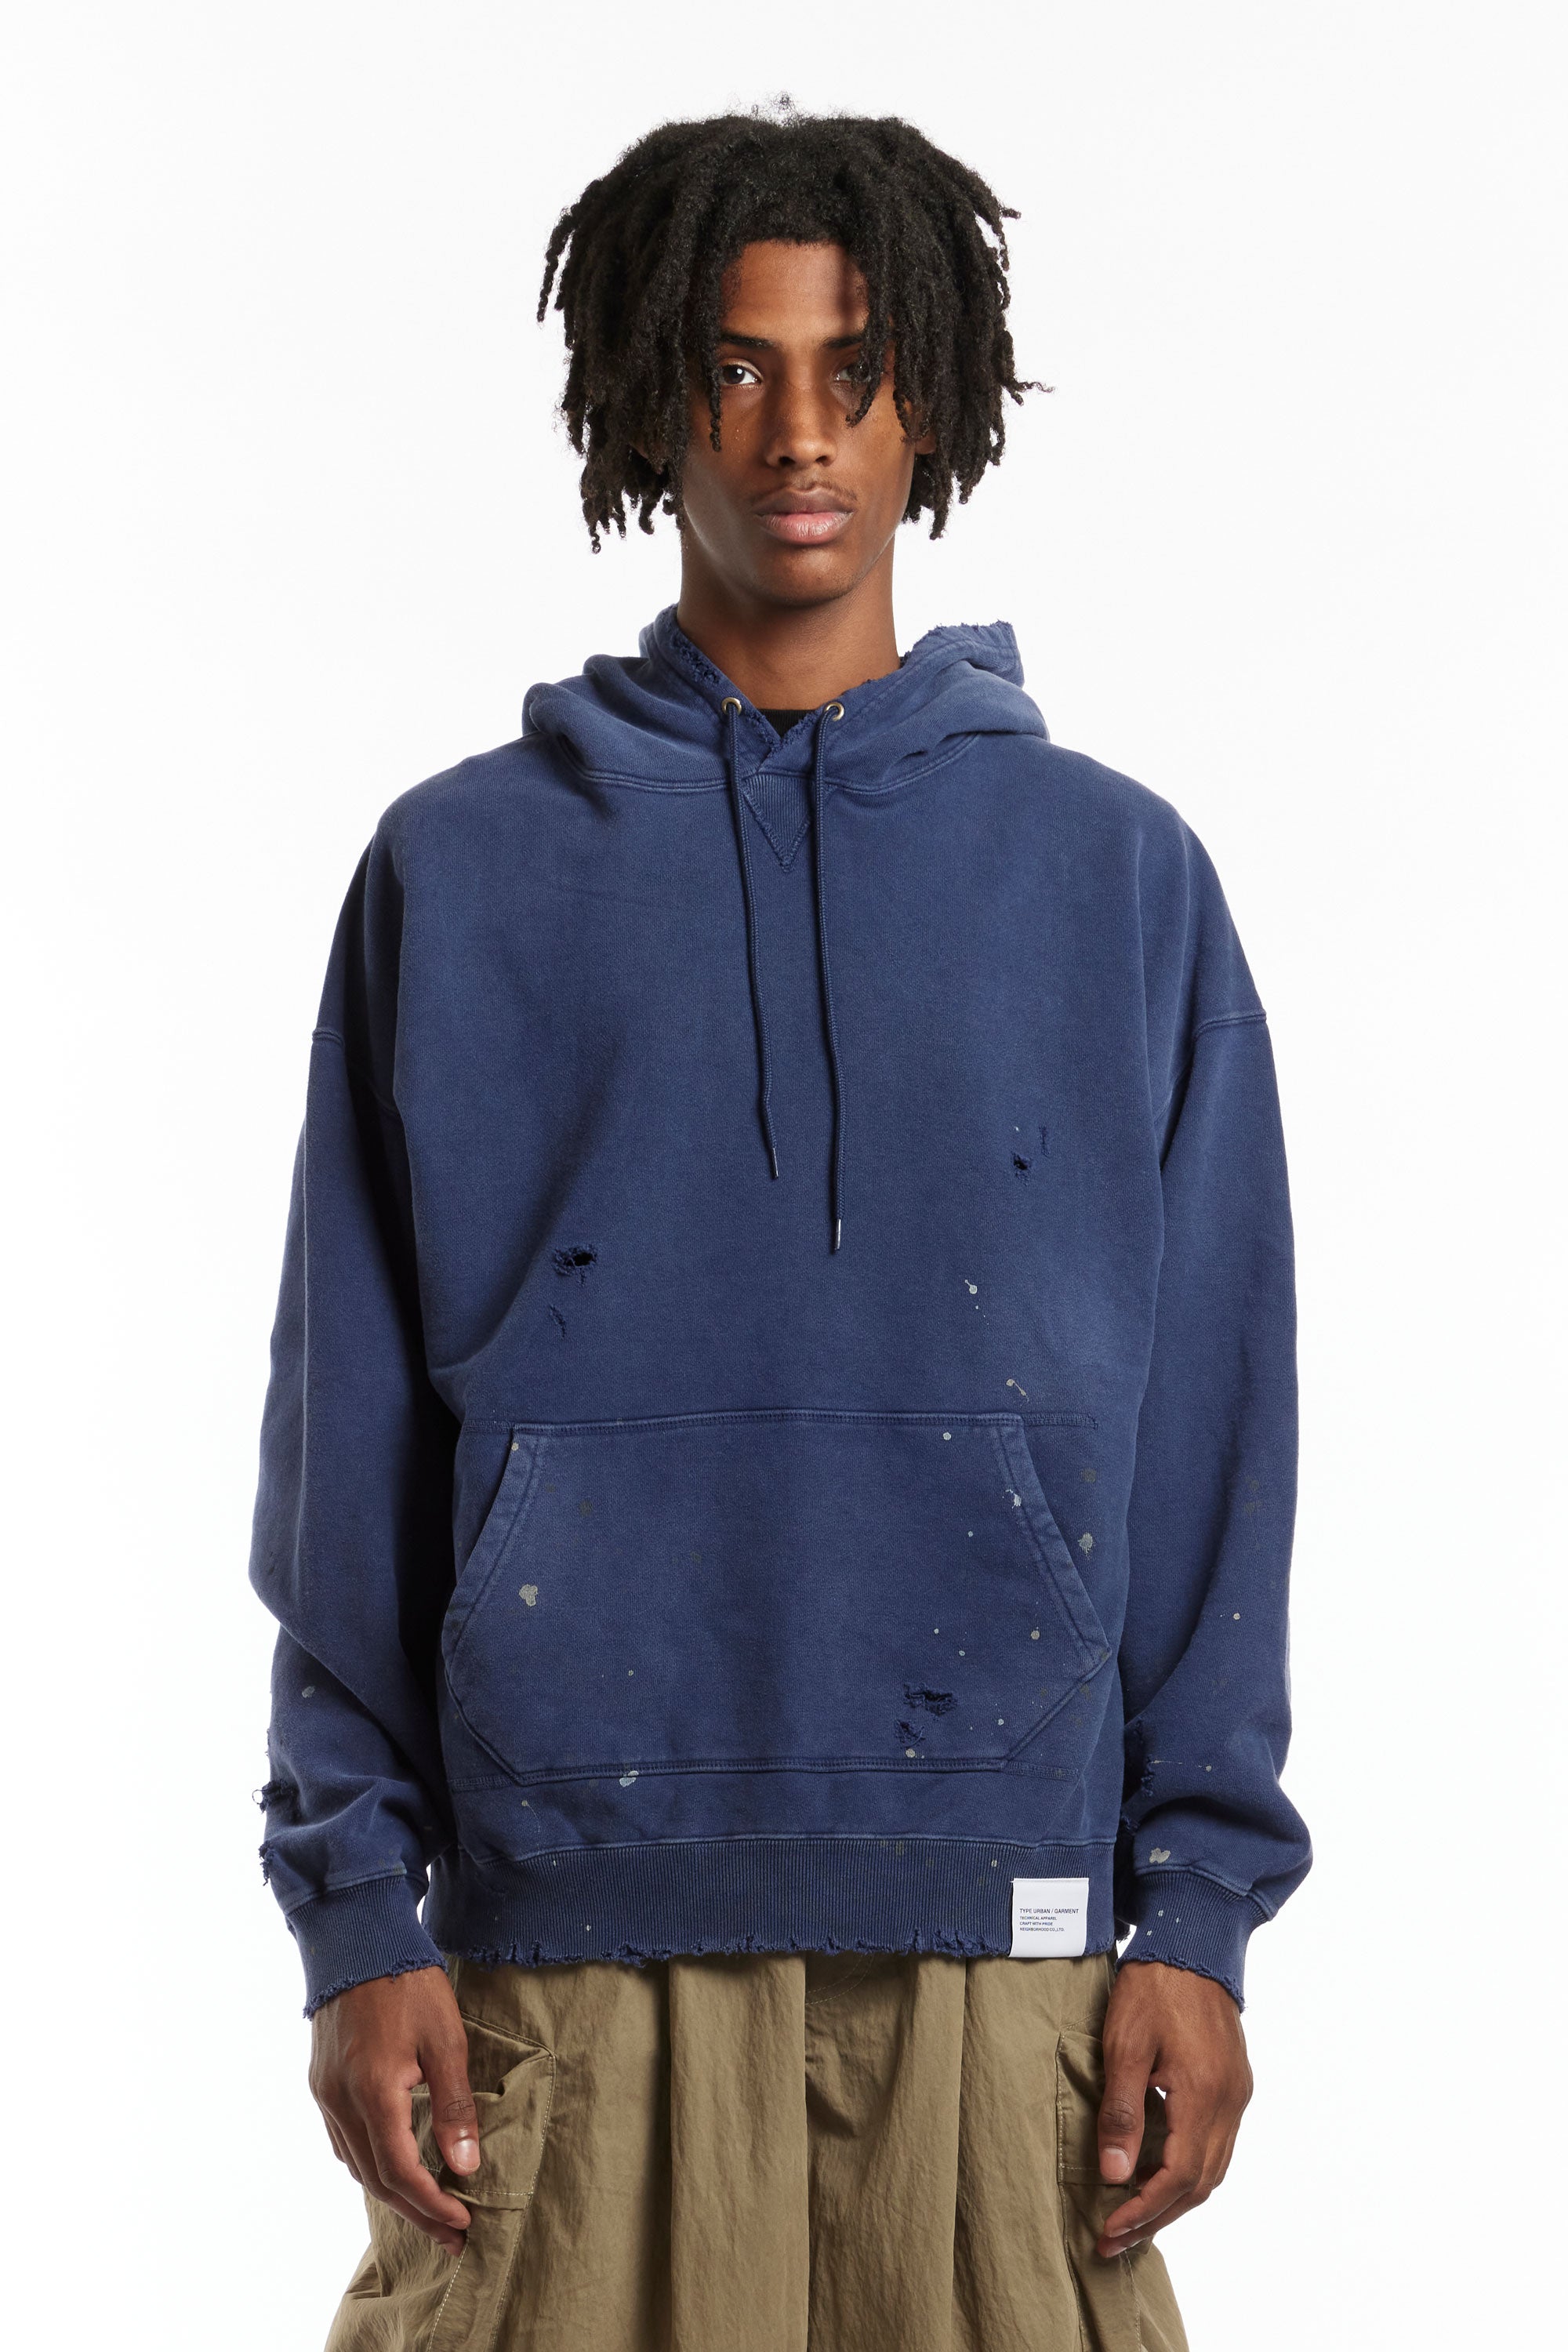 The NEIGHBORHOOD - DAMAGE HOODED SWEATSHIRT NAVY available online with global shipping, and in PAM Stores Melbourne and Sydney.